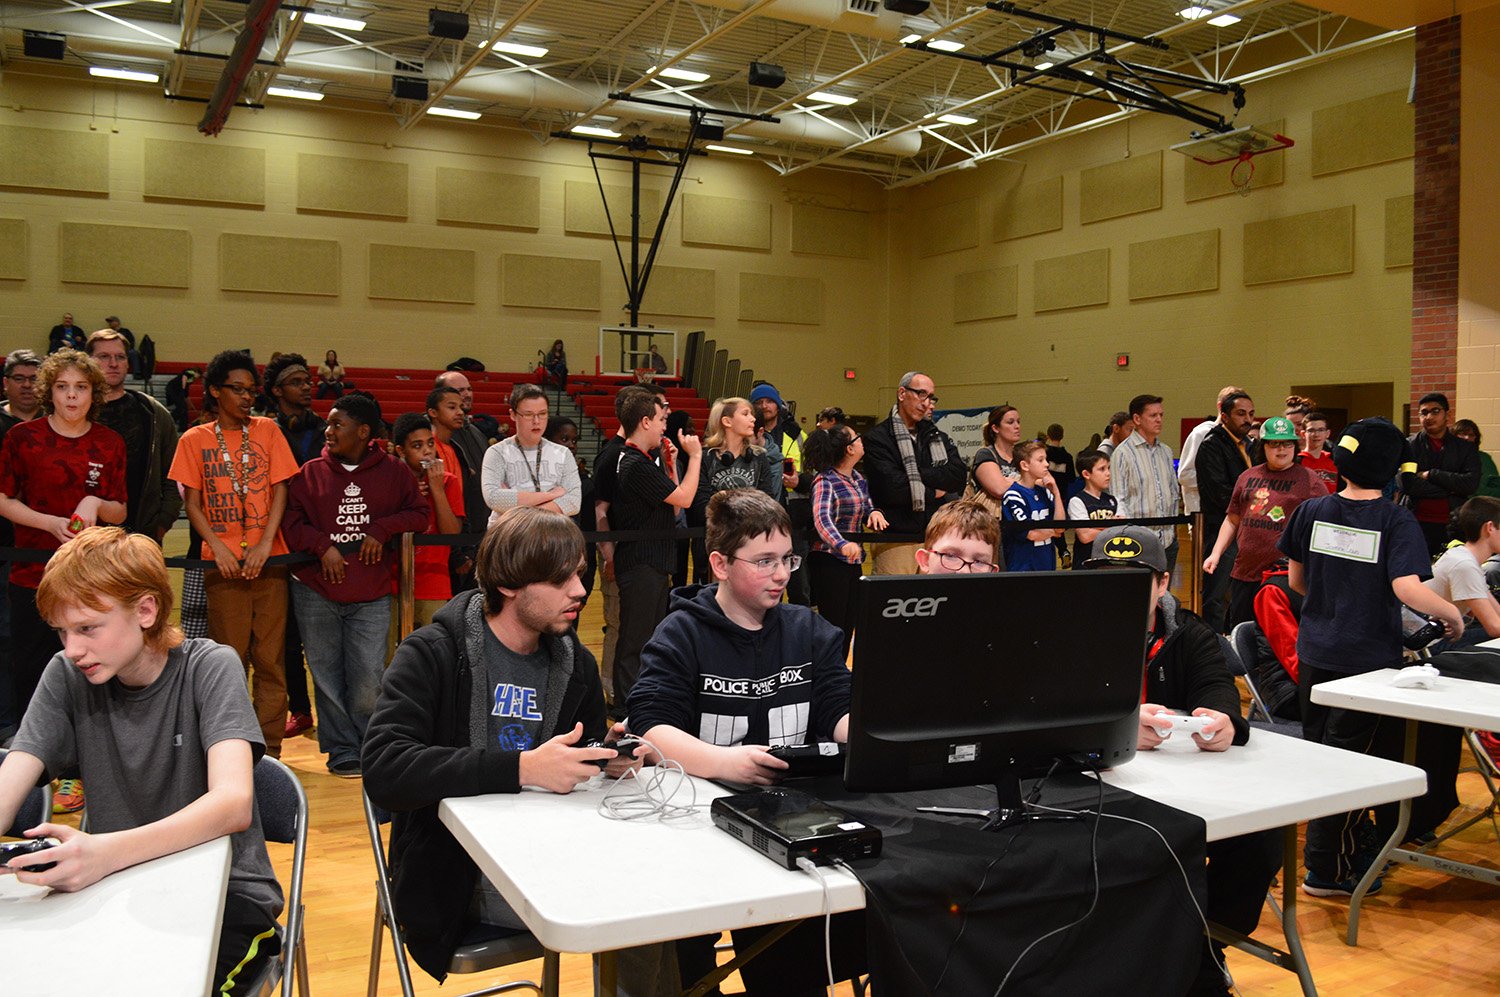 Live photo of students focused on their games as people watch between them